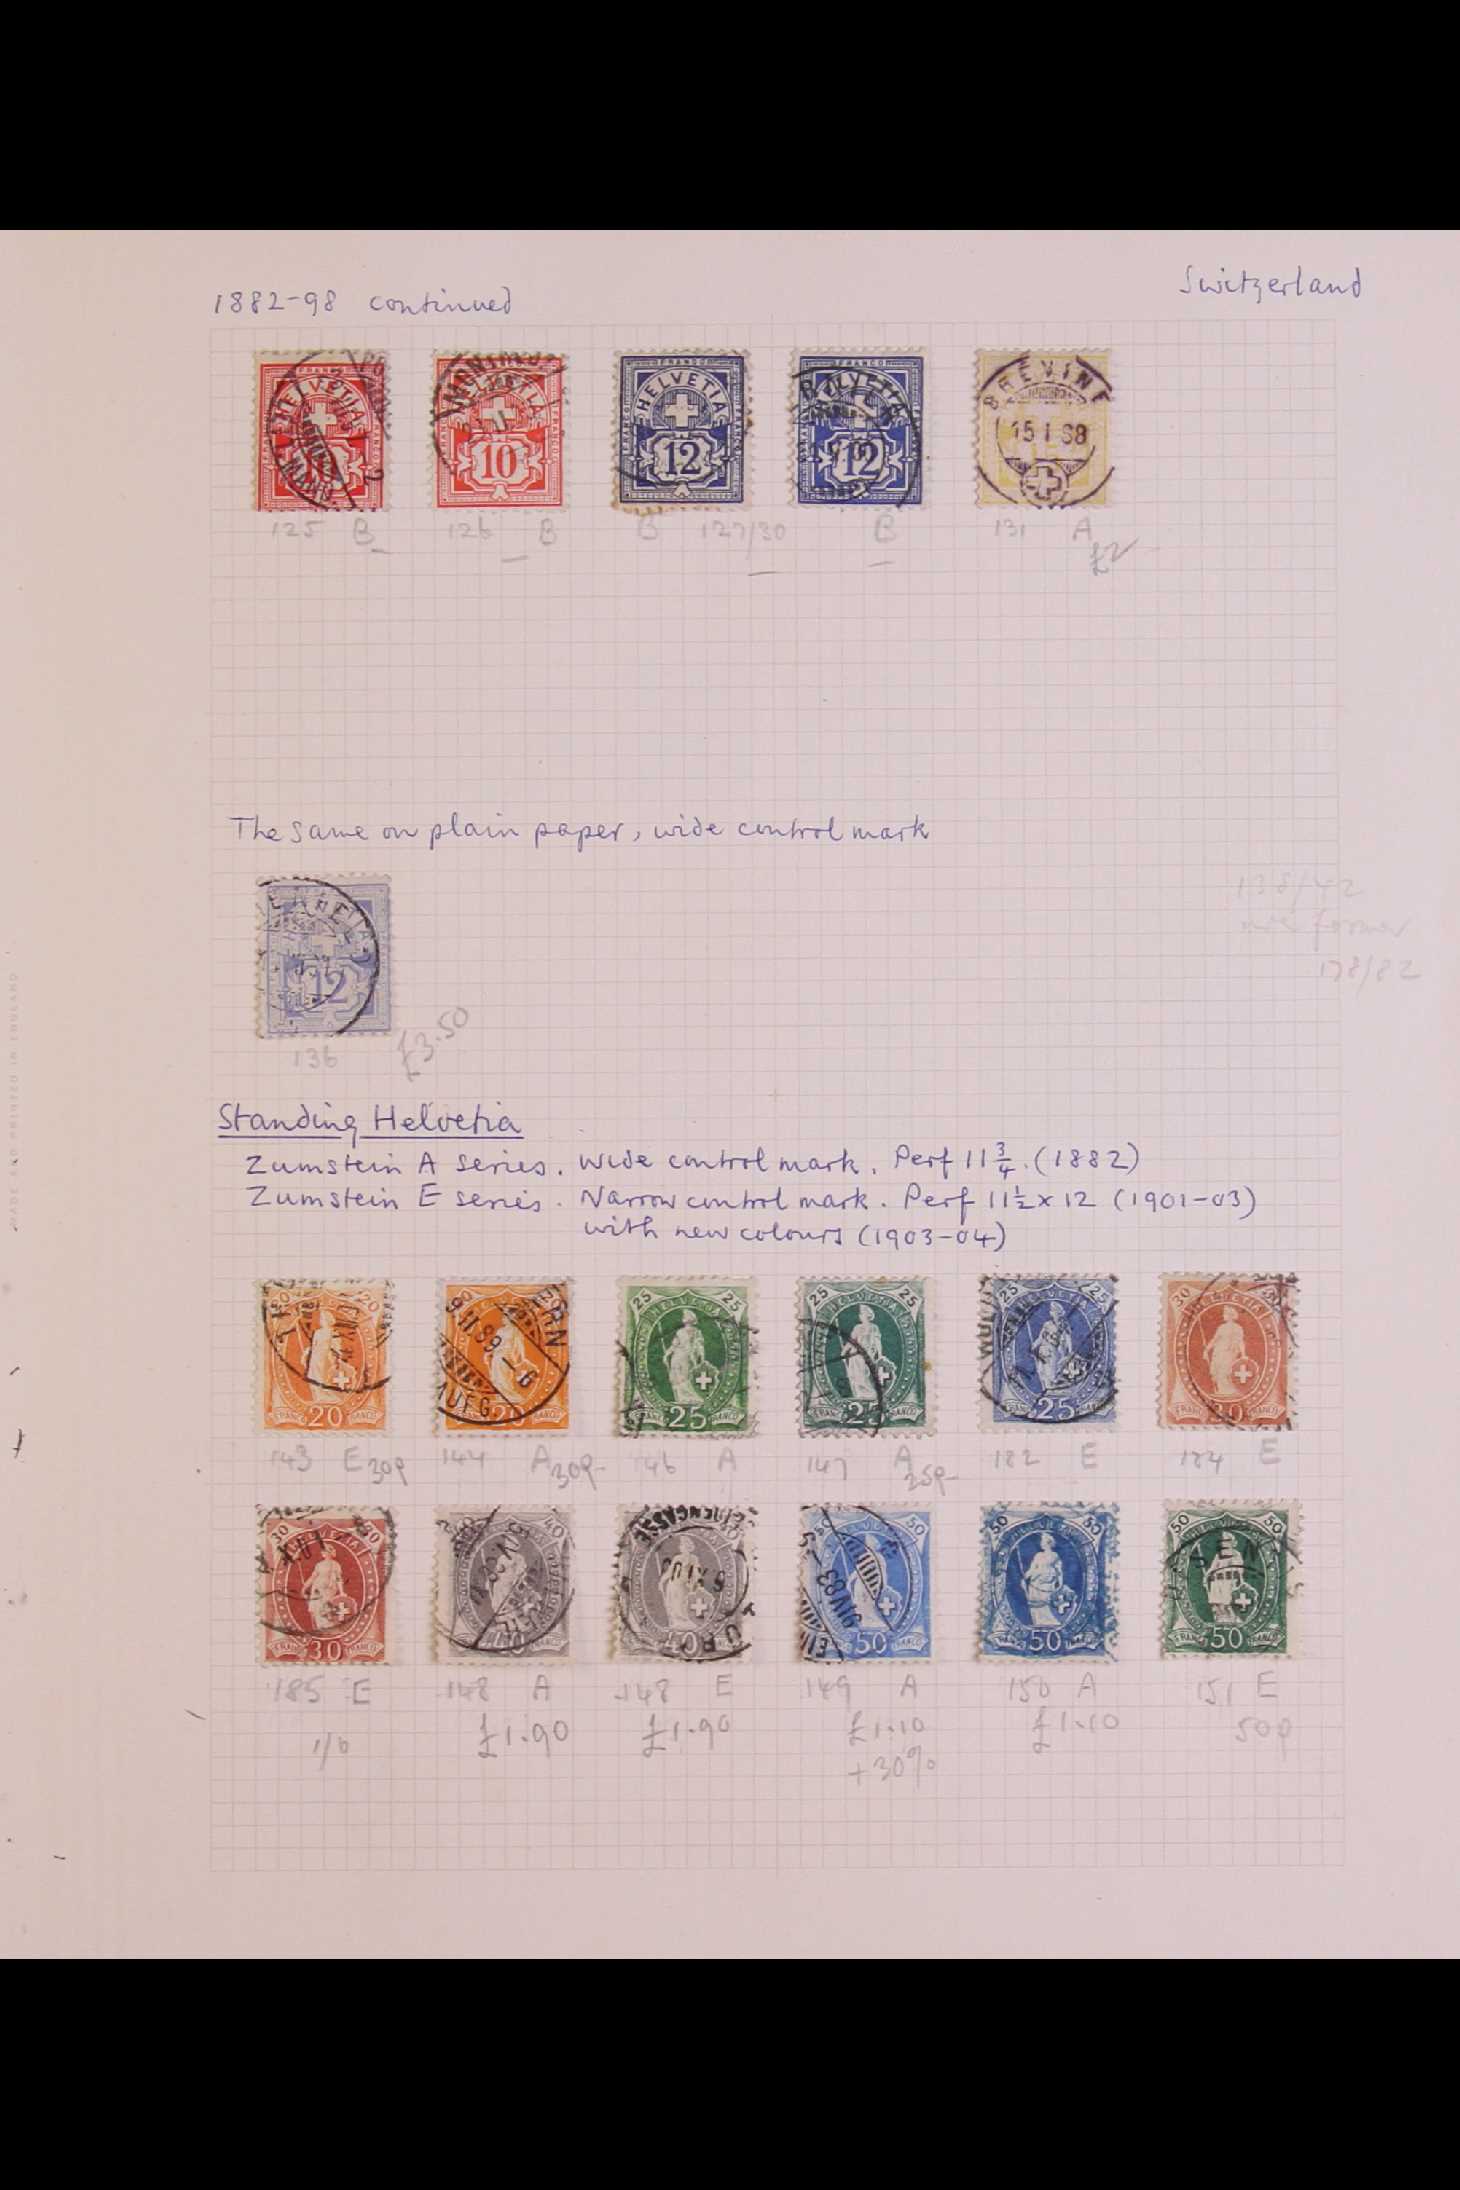 SWITZERLAND 1850 - 1959 COLLECTION of chiefly used stamps on leaves, incl 1850 5r & 10r, 1851 5r, - Image 4 of 17